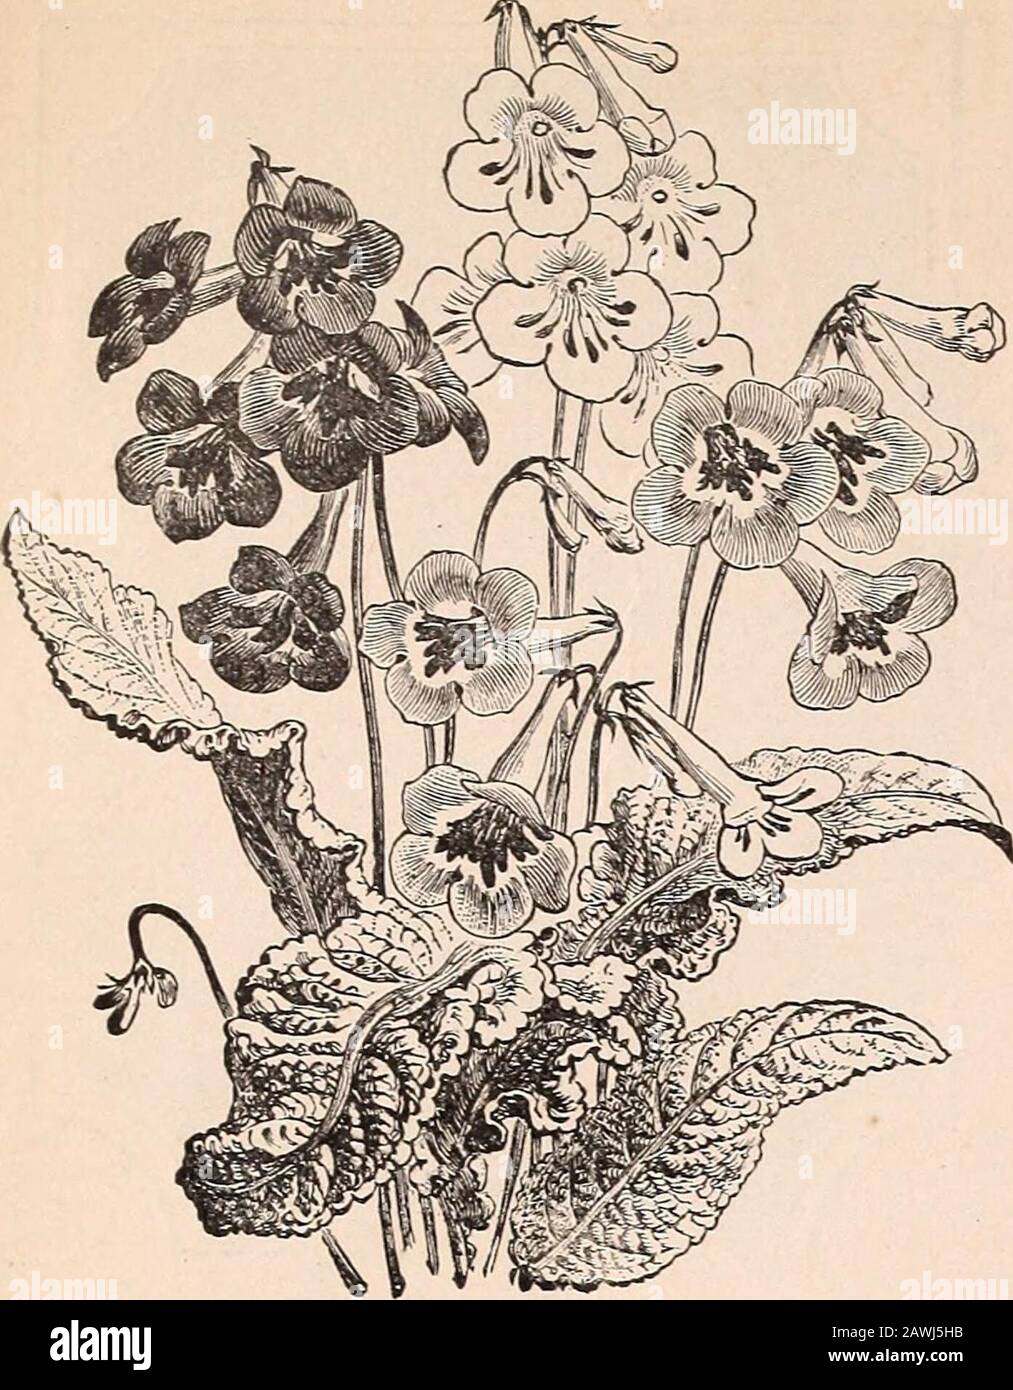 R& JFarquhar and Co'scatalogue, 1897 : reliable tested seeds plants, bulbs fertilizers tools, etc. . OBE. Nothing moredesirable for bouquets can be imagined than the beautiful, longsprays of this Stock, with its spicy fragrance ; whether grown forcutting indoors during winter, or in the open garden flower bed, itis admirable in every way. No. 7417. Pkt., .20. PEA, NEW DWARF, YELLOW FLOWERING. (Croto-laria Retusa.) The flowers of this beautiful annual are golden-yellow and of Sweet Pea form; it is a low-growing, branchingplant, every branch producing long racemes of these golden sweetpea-like f Stock Photo